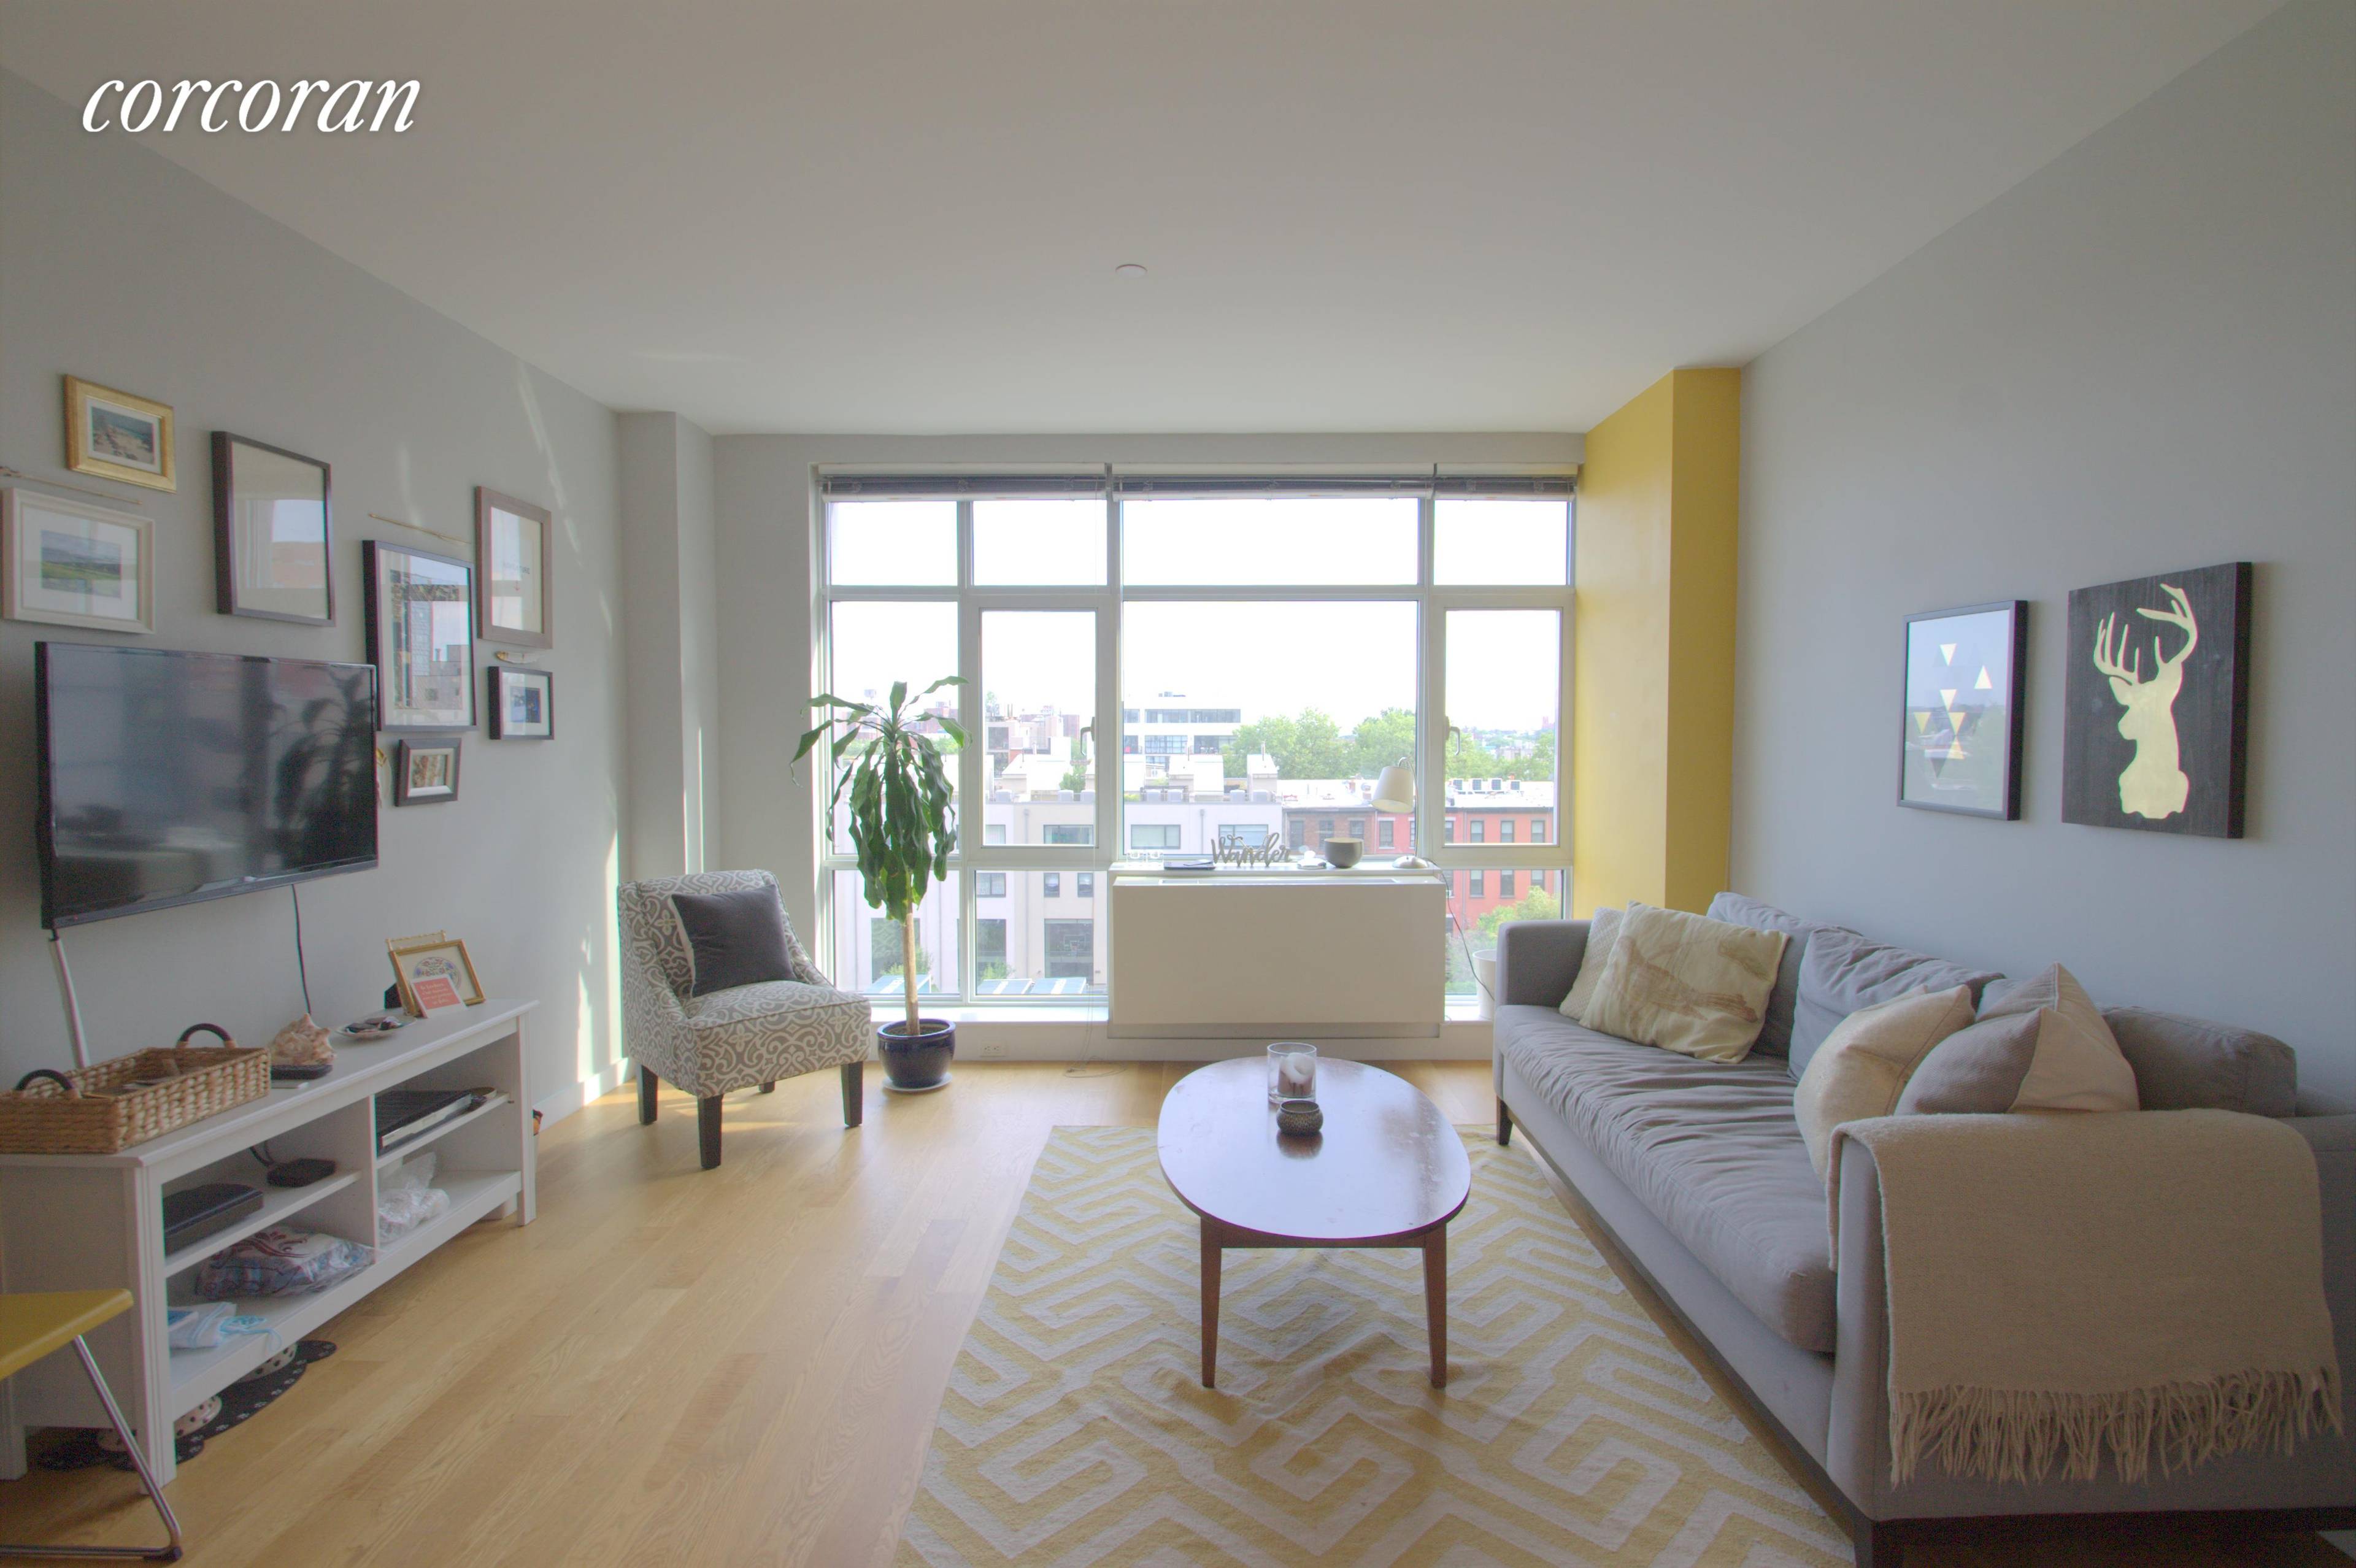 Sunny South Facing One Bedroom with Over Sized Windows letting in A TON of Natural Light !